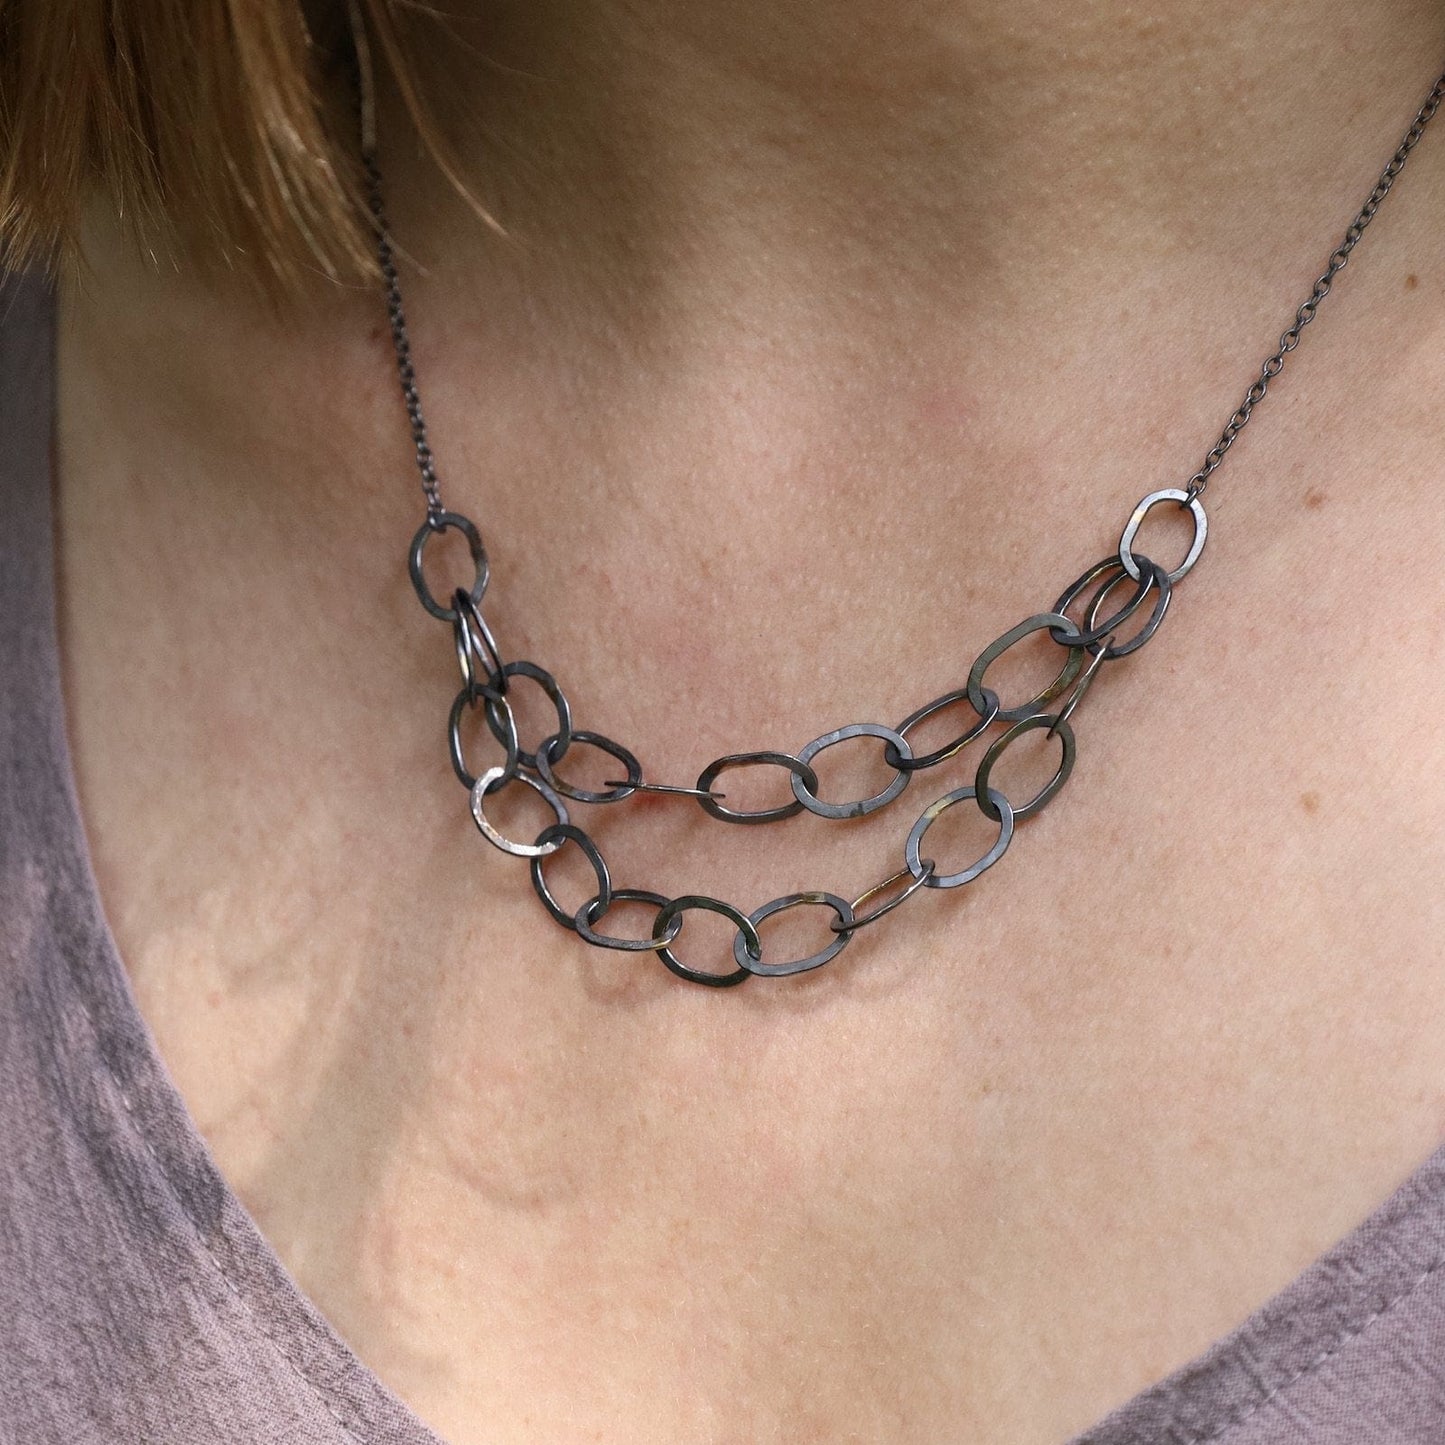 NKL-18K Double Linked Chain Necklace - Oxidized Silver with 18k Gold